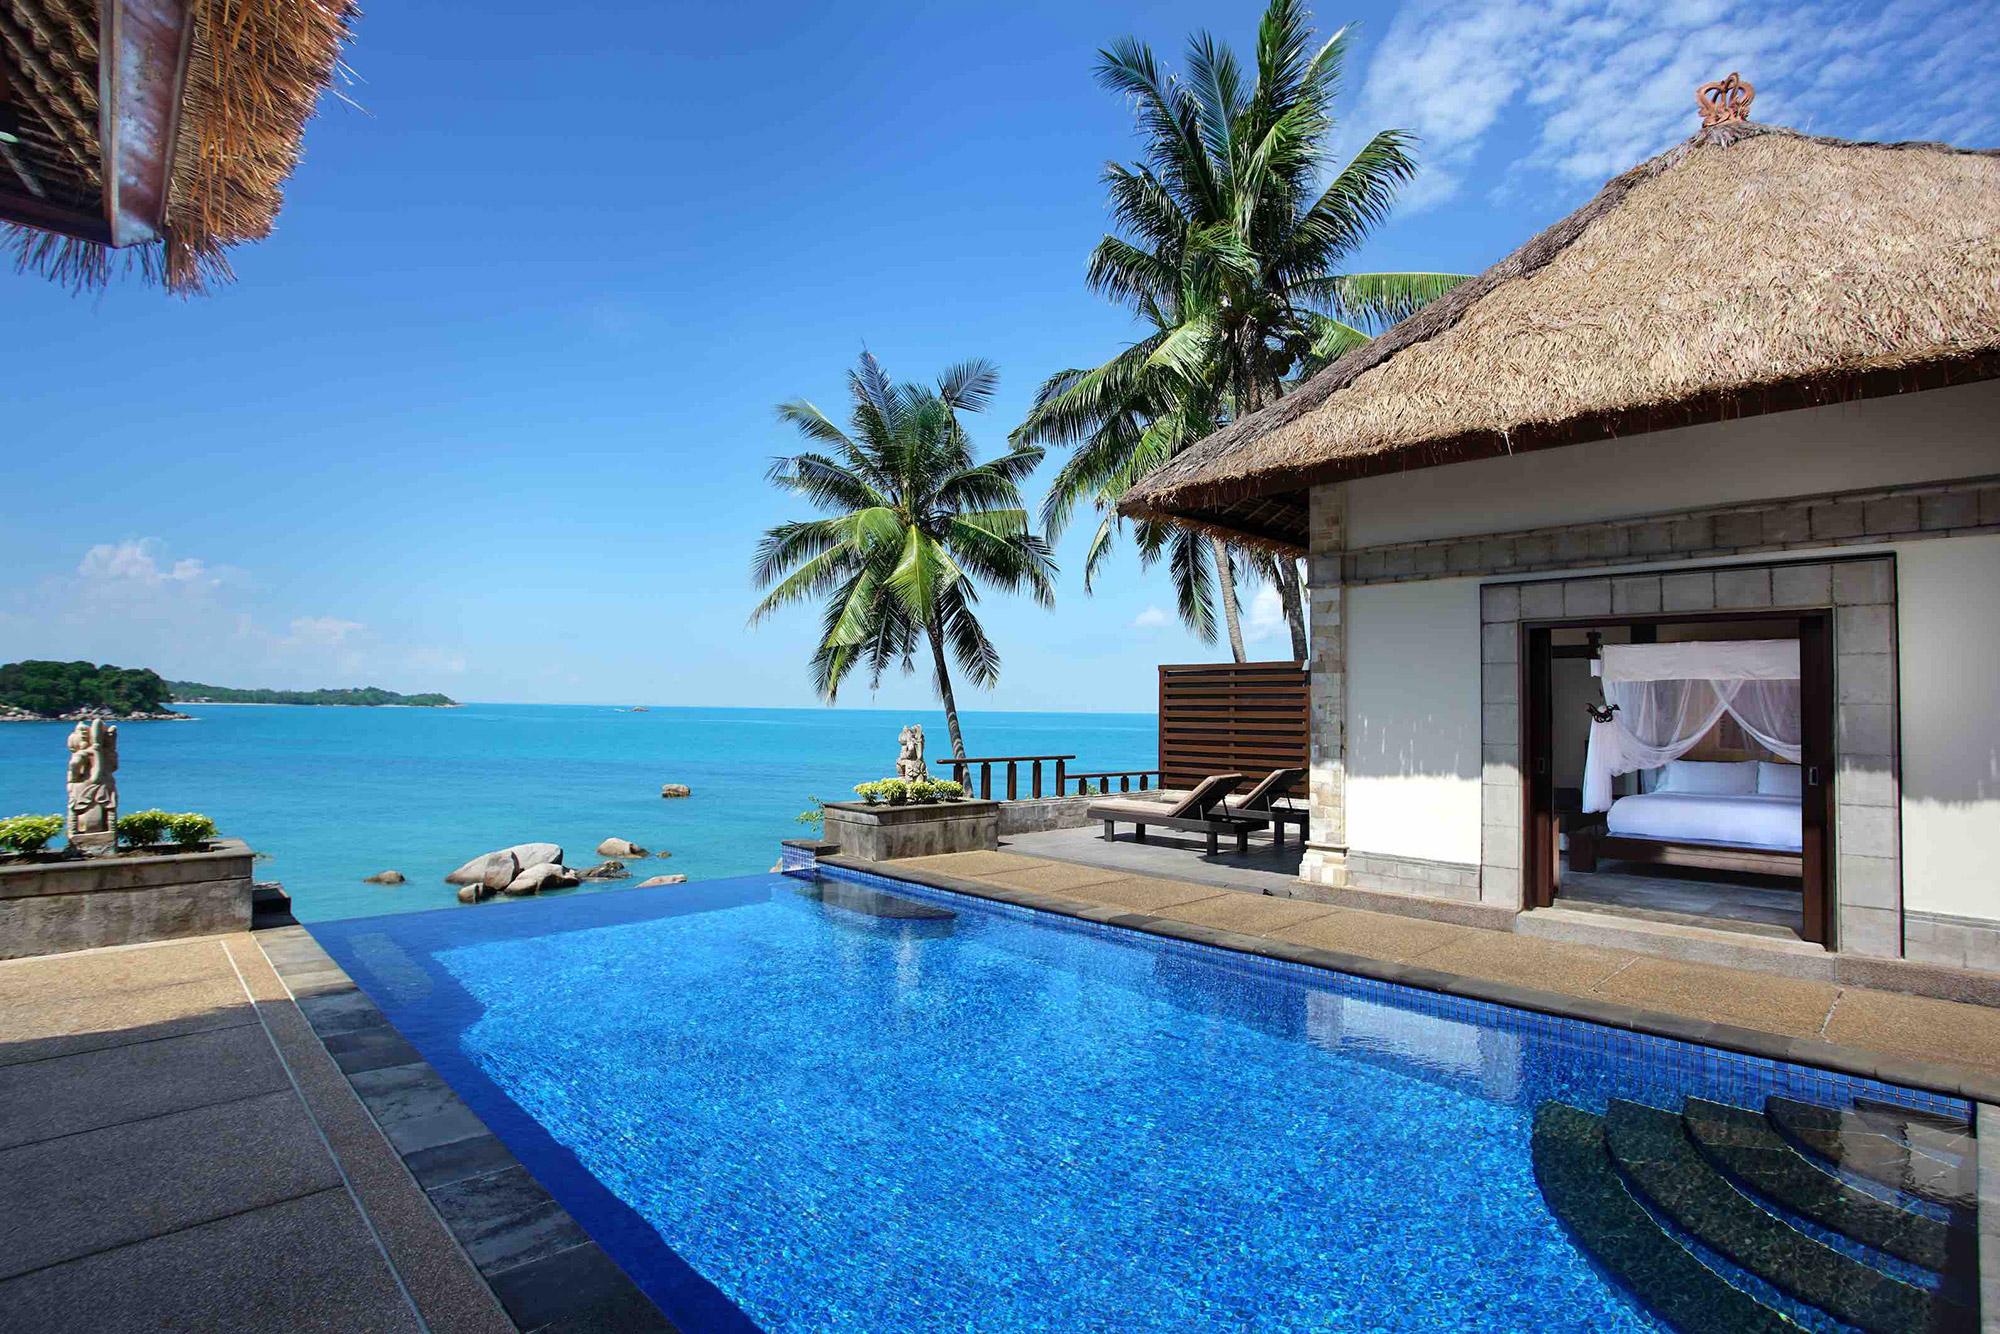 Banyan Tree Indonesia Bintan Offers - Stay More Pay Less